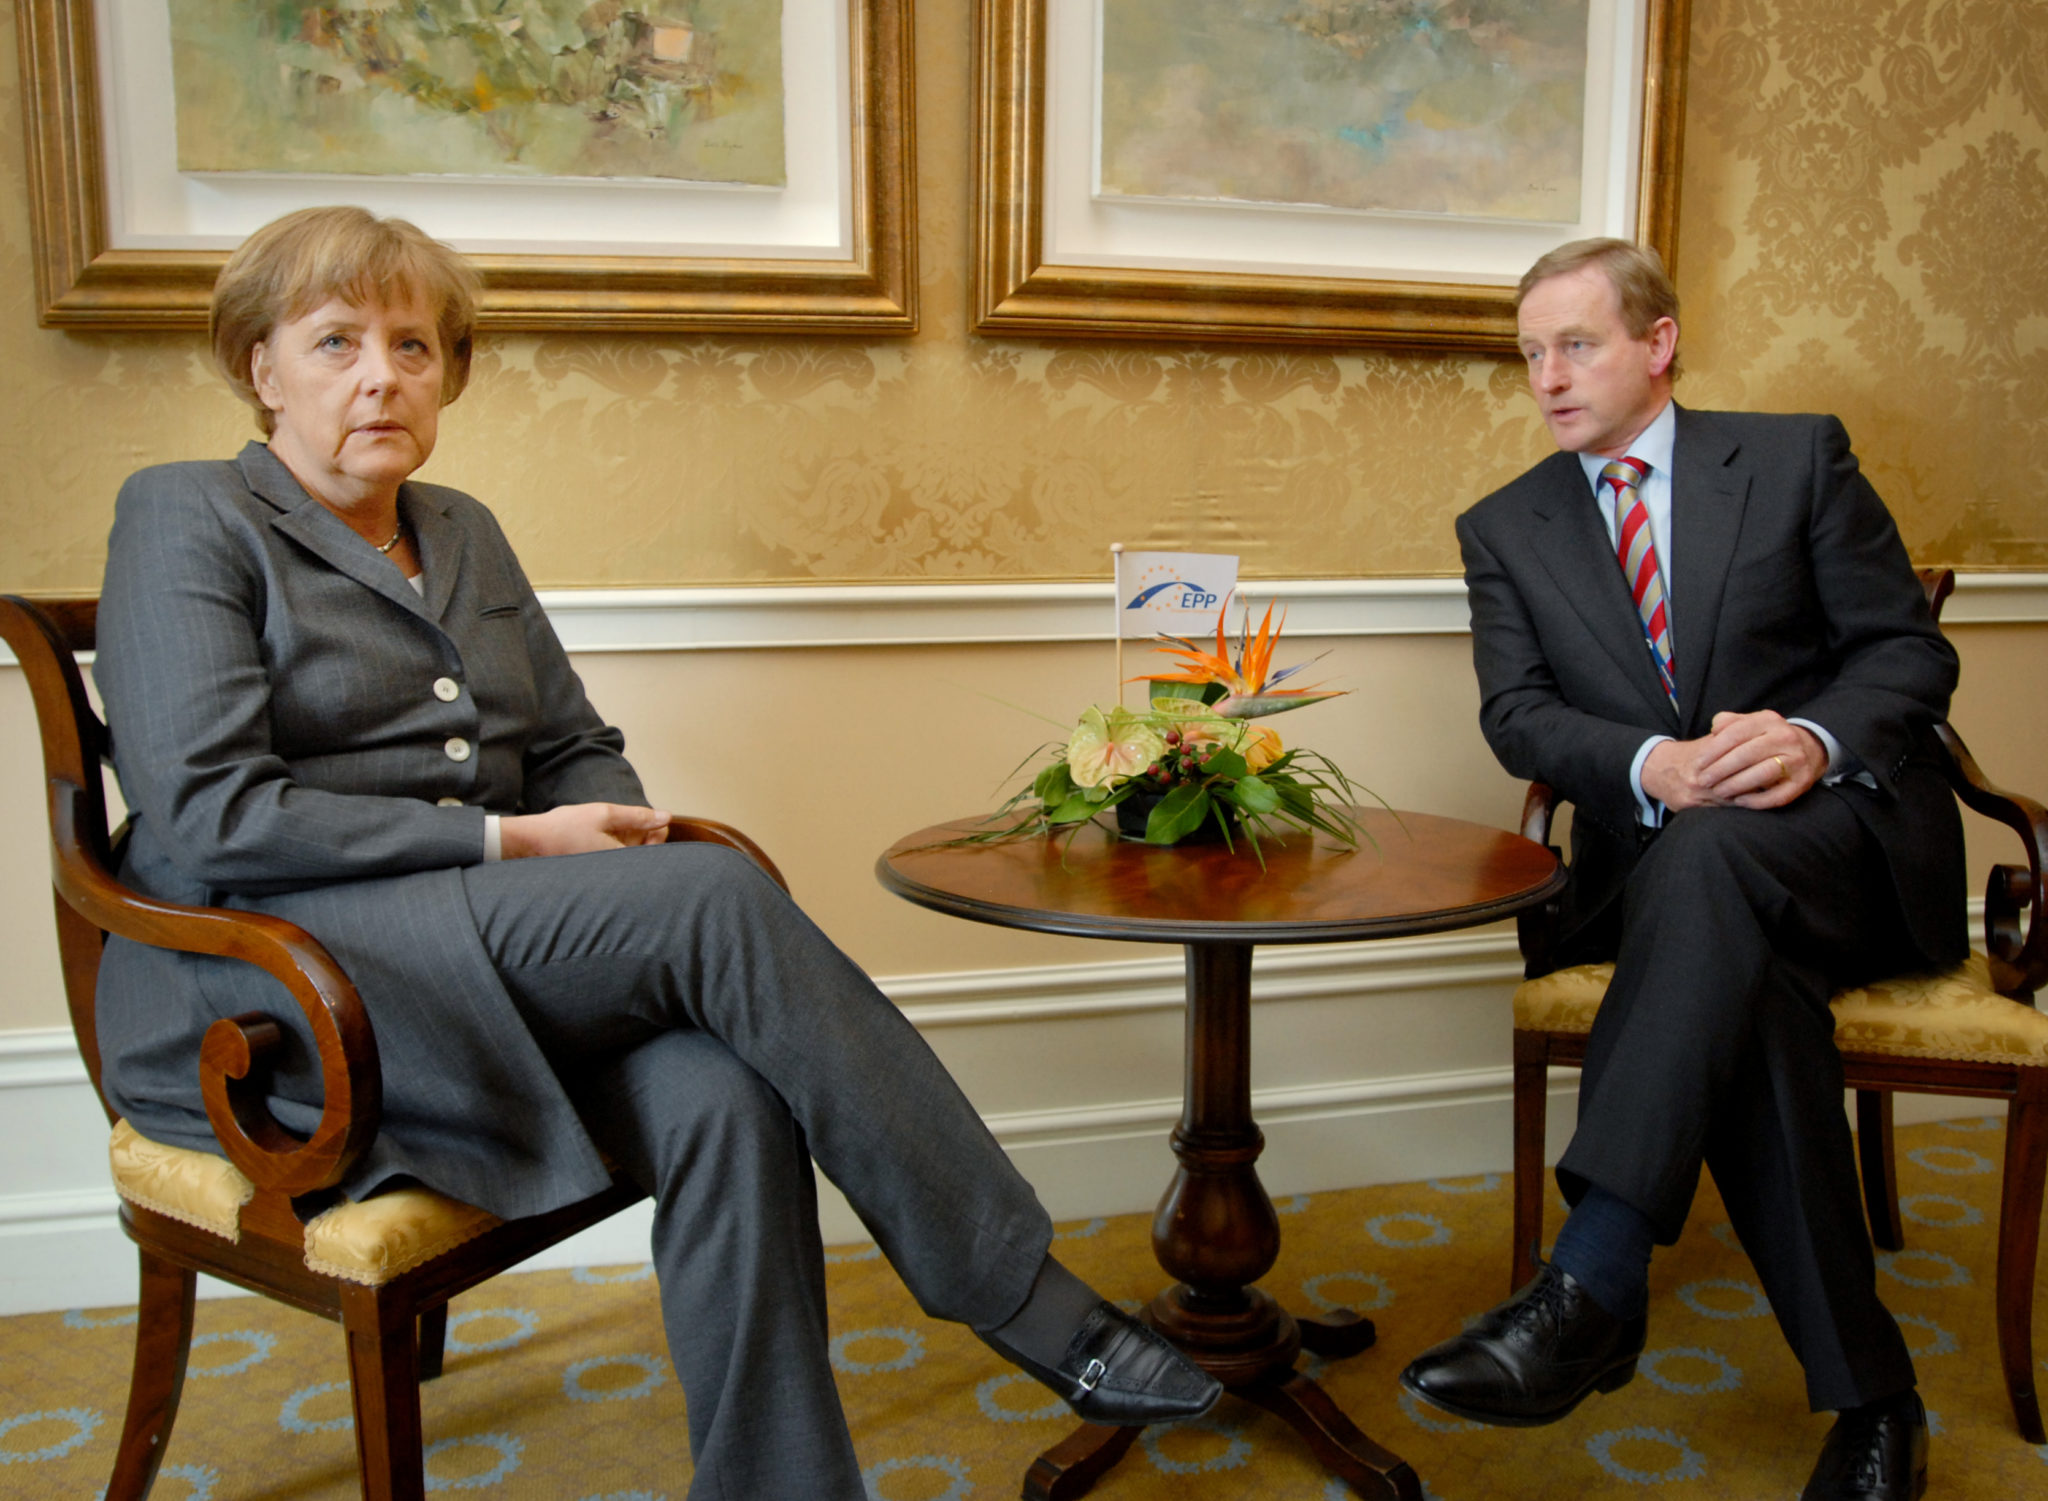 Former Taoiseach Enda Kenny and Angela Merkel at a meeting in Dublin's Shelbourne Hotel in April 2008.